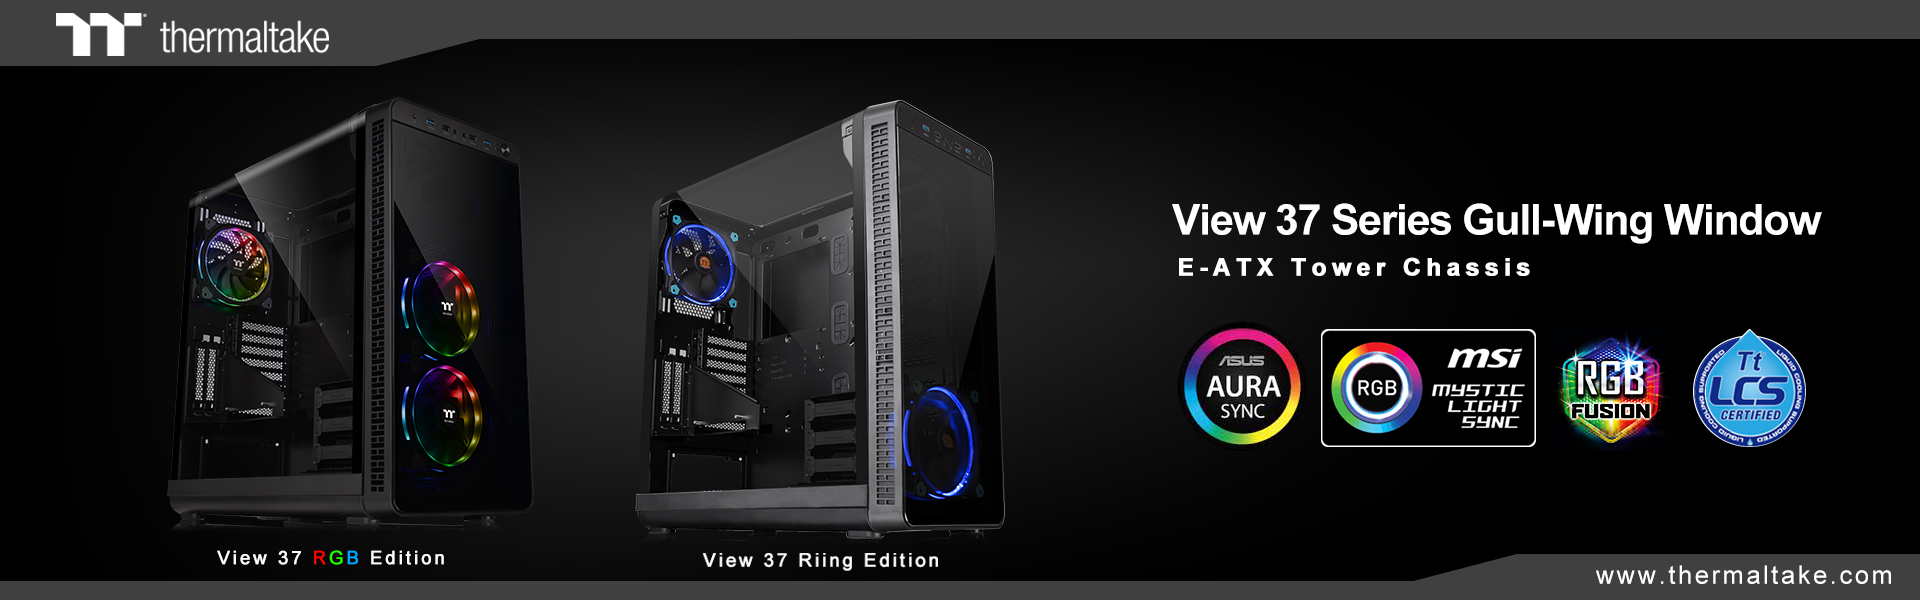 thermaltake unveils view 37 rgb edition and view 37 riing edition mid tower chassis Thermaltake เปิดตัวเคสรุ่นใหม่ล่าสุด View 37 RGB Edition และ View 37 Riing Edition Mid Tower Chassis 